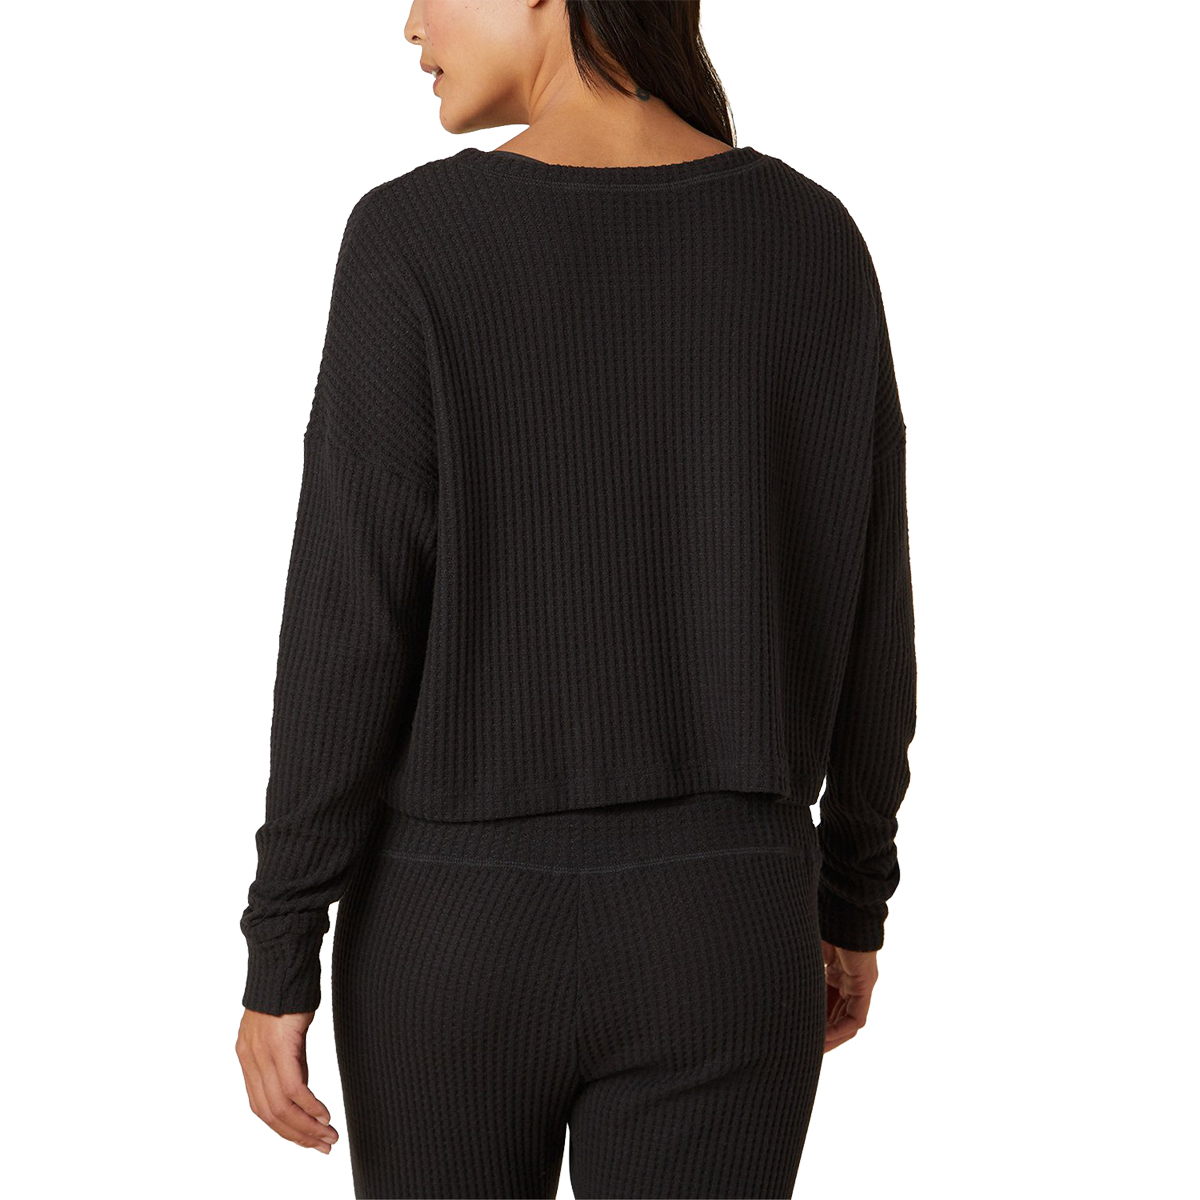 Women's Brushed Up Cropped Pullover alternate view